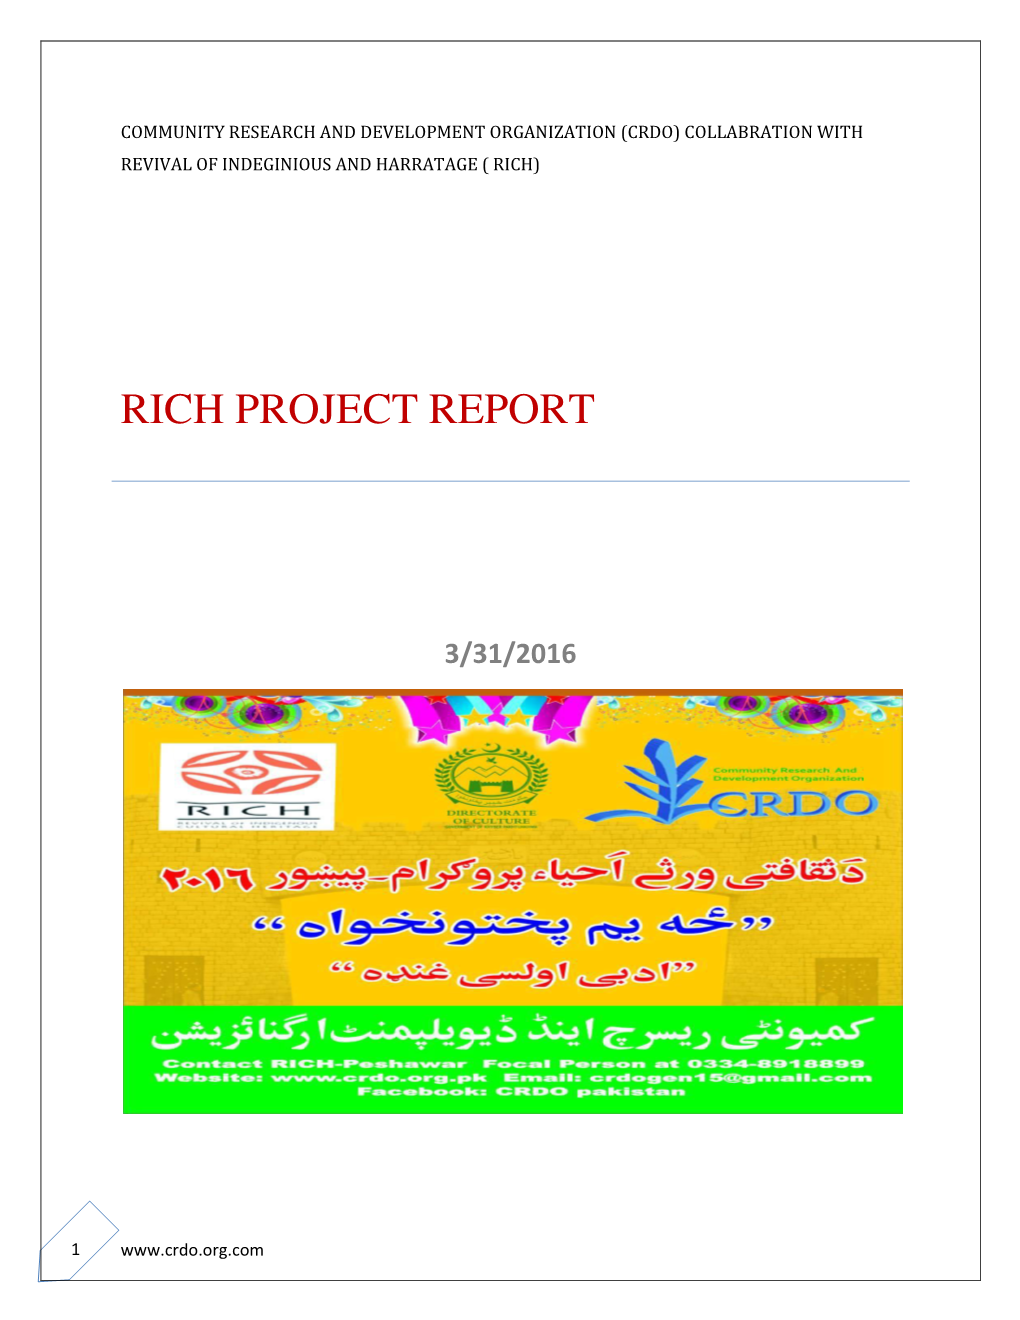 Rich Project Report